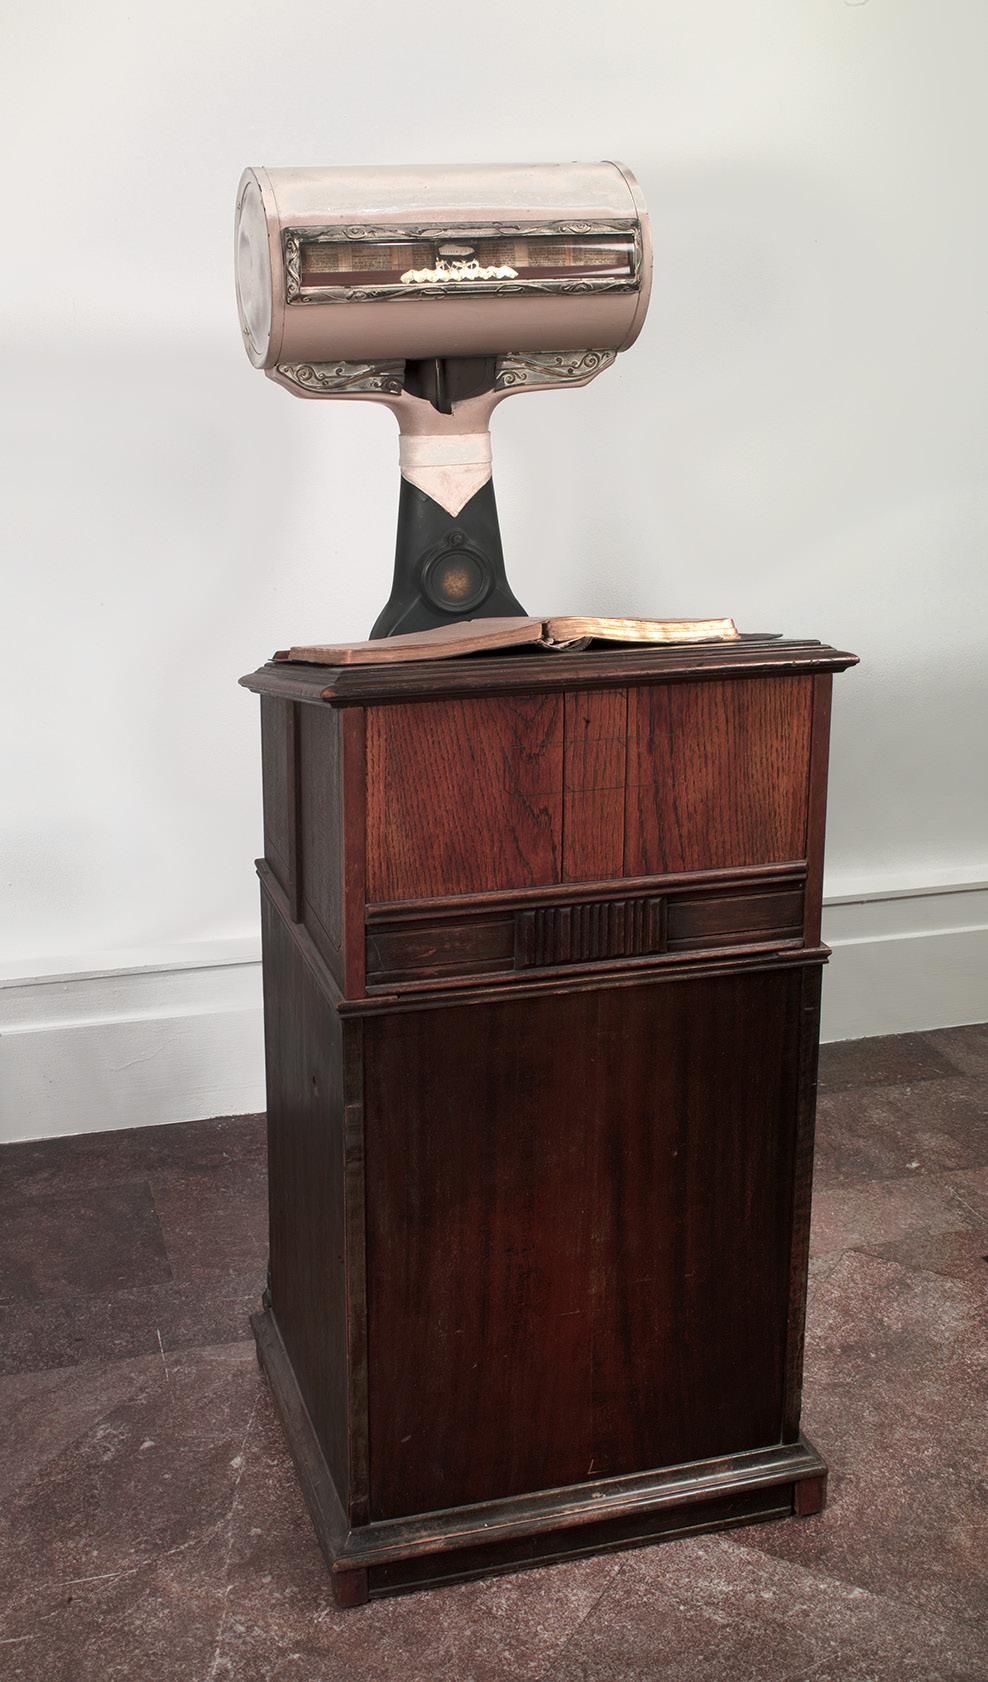 todd pattison The Book as Art: Conserving the Bible from Edward Kienholz s The Minister abstract The most successful conservation treatments are developed with meaningful discussions between the